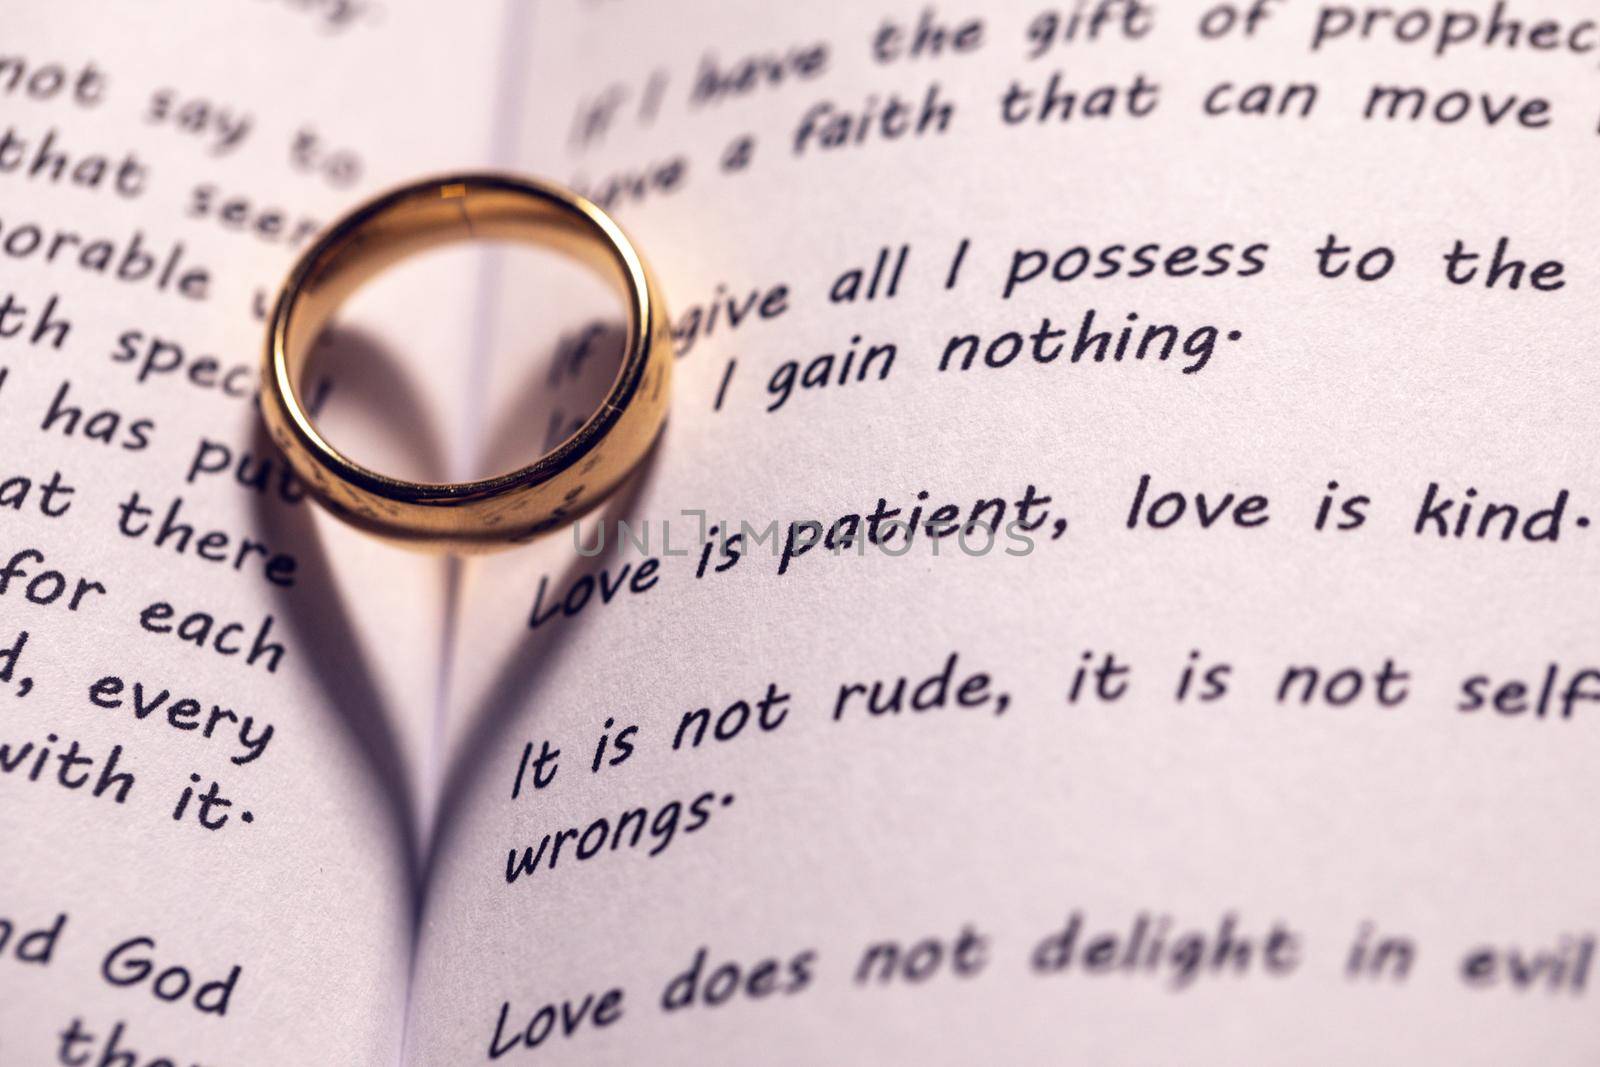 Golden wedding ring on bible book by Yellowj